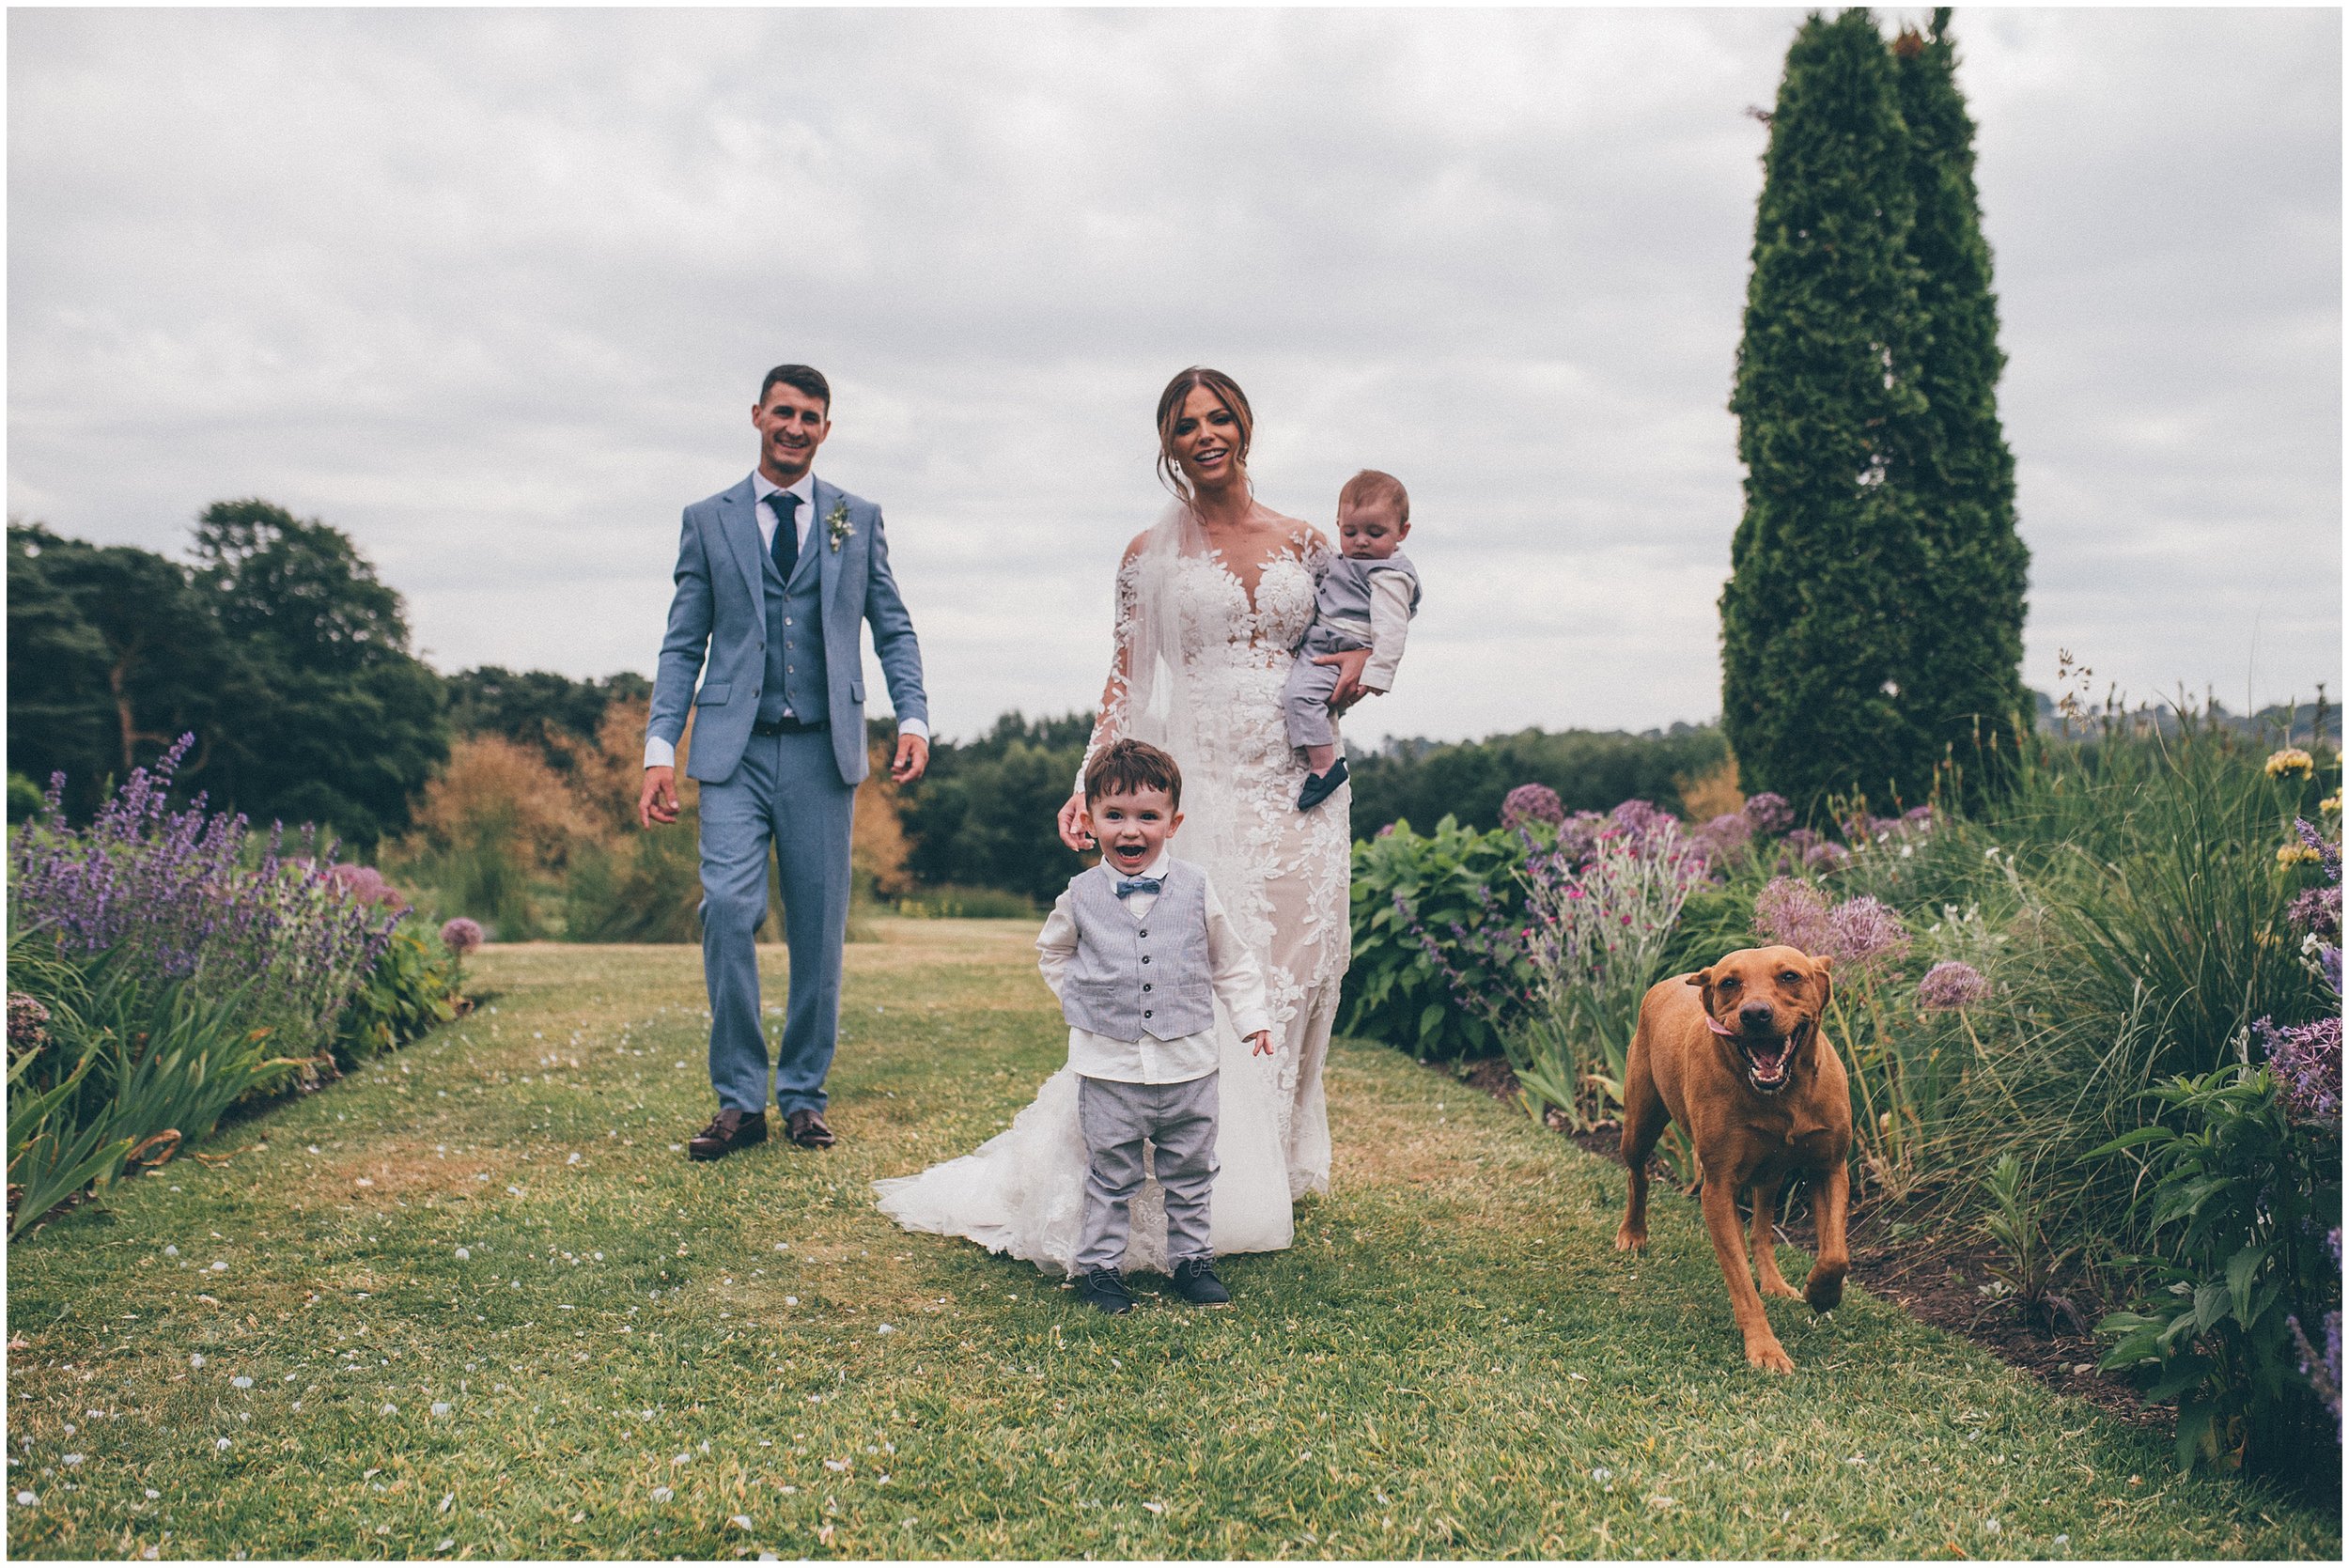 Beautiful bride and her family enjoy the pretty gardens at Abbeywood Estate in Delamere, Cheshire.